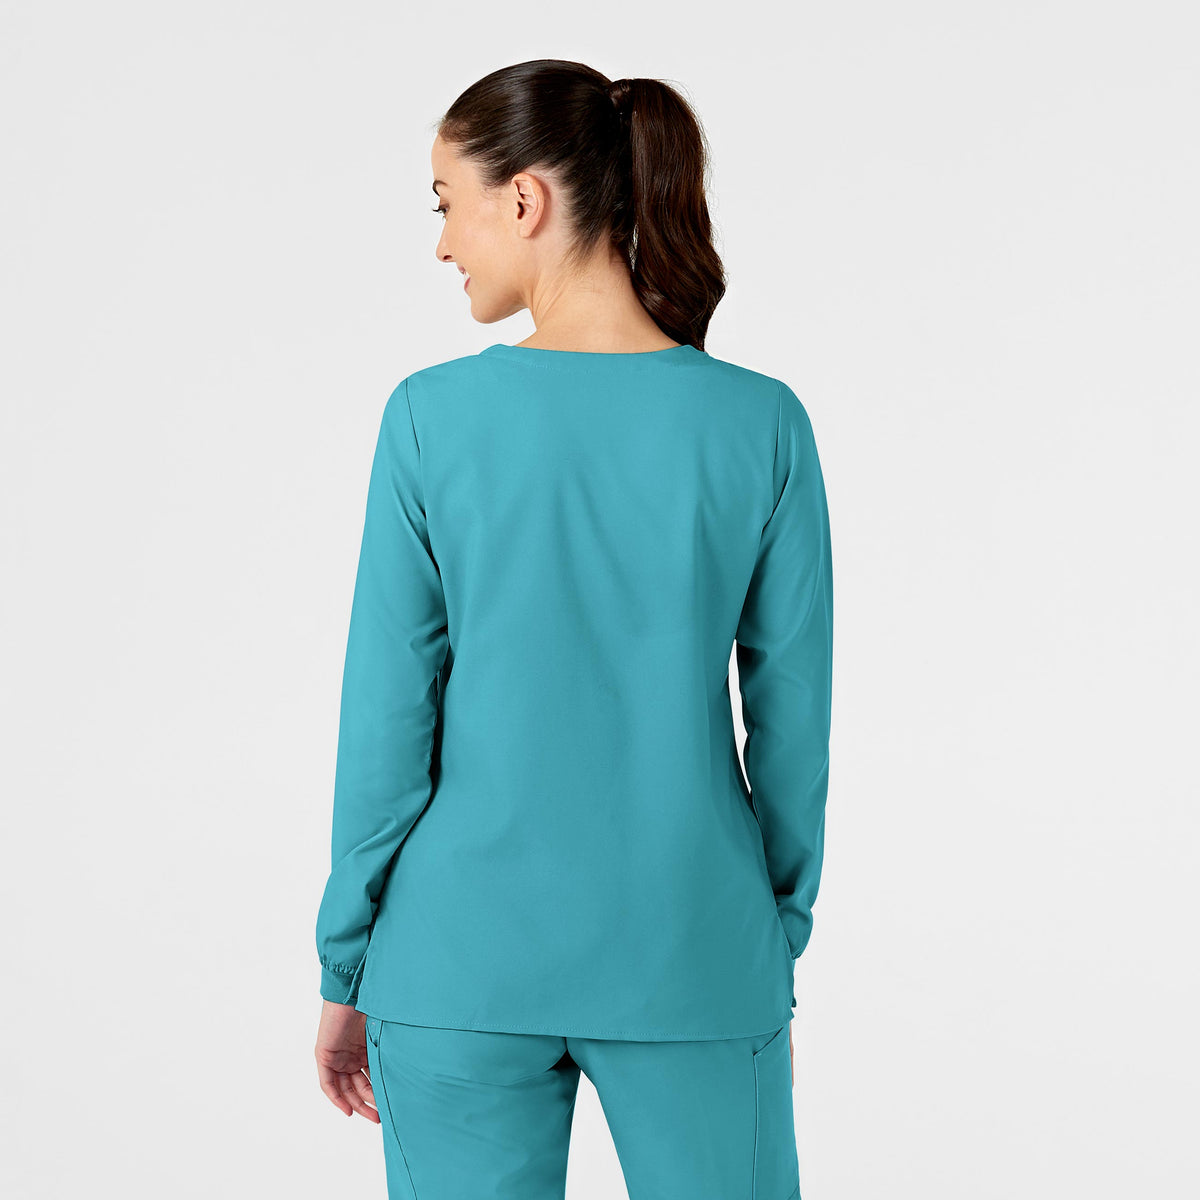 W123 Women's Crew Neck Warm Up Jacket Teal Blue back view